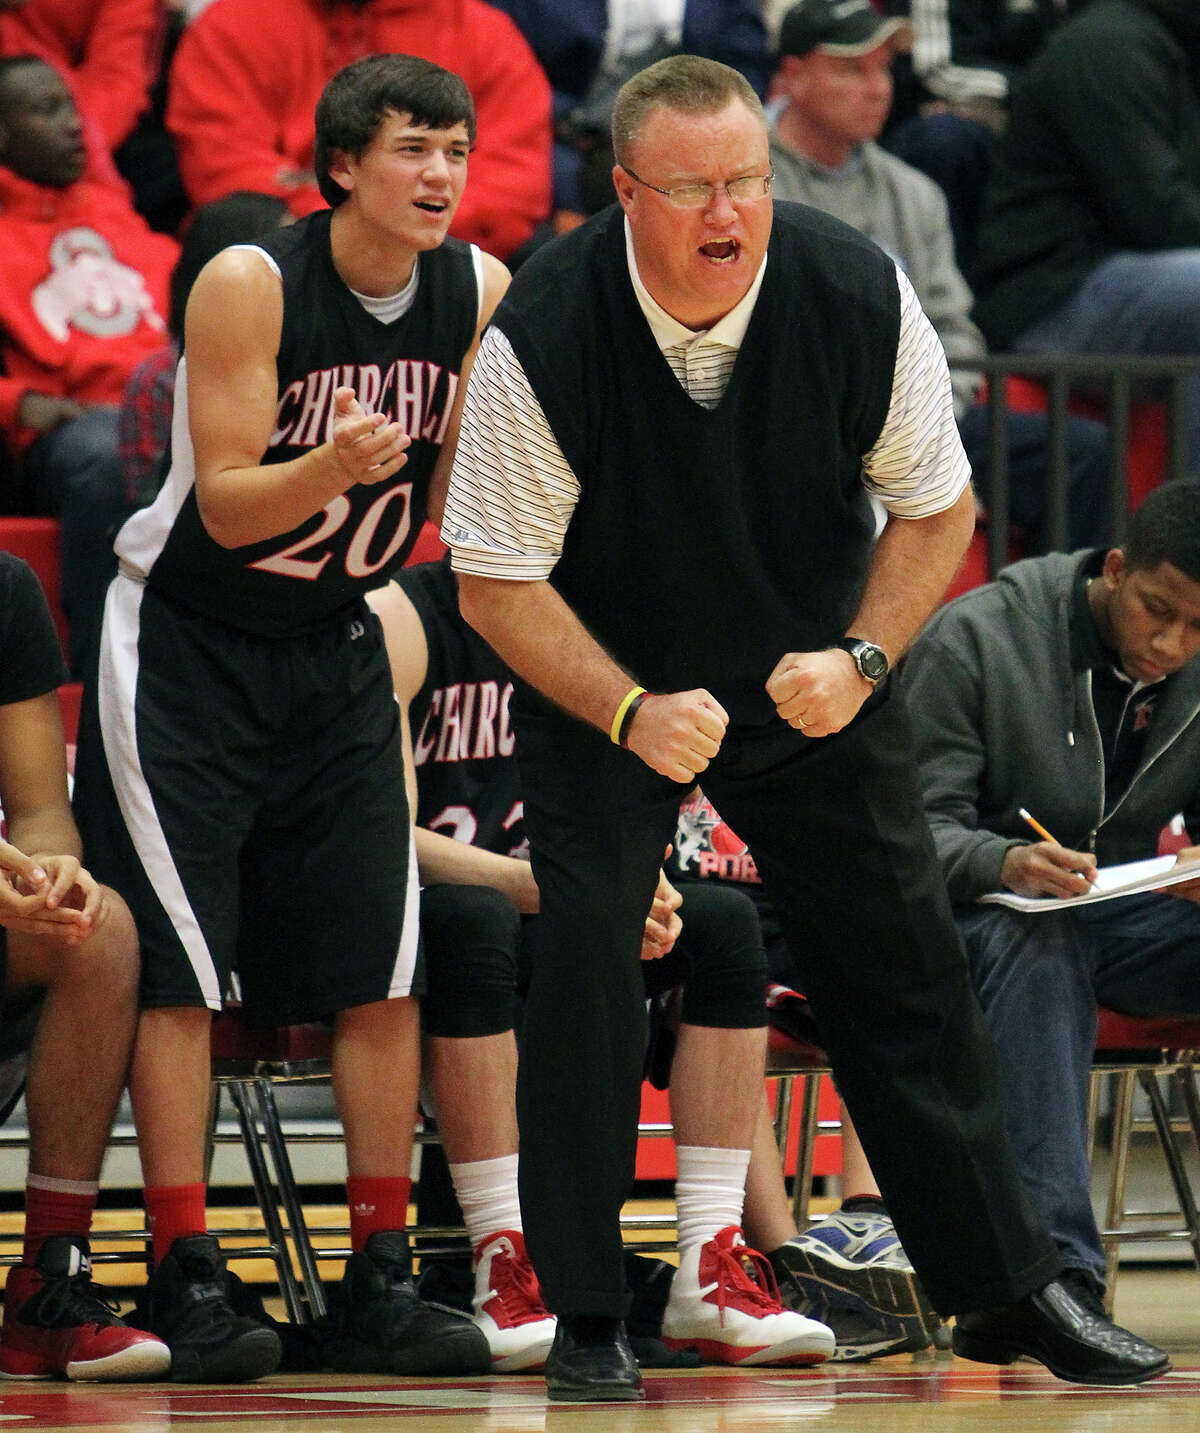 Churchill coach Timothy Woods pumps up his team during their game against Judson on Tuesday, Dec. 11, 2012. Churchill defeated Judson, 57-54.